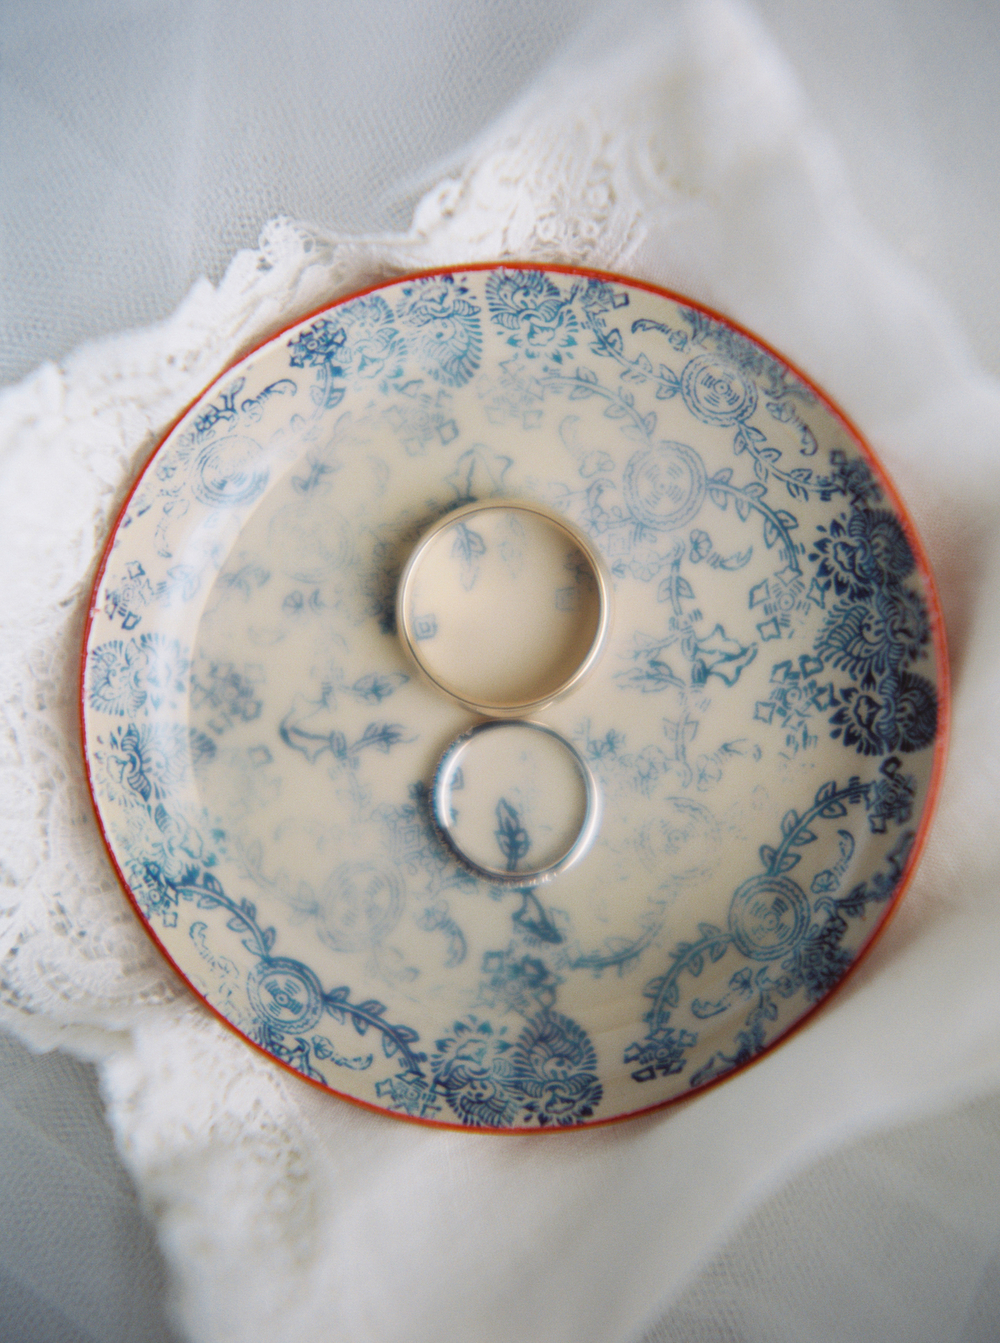 rings in a blue and copper ring dish detail with a lace vintage handkerchief and tulle